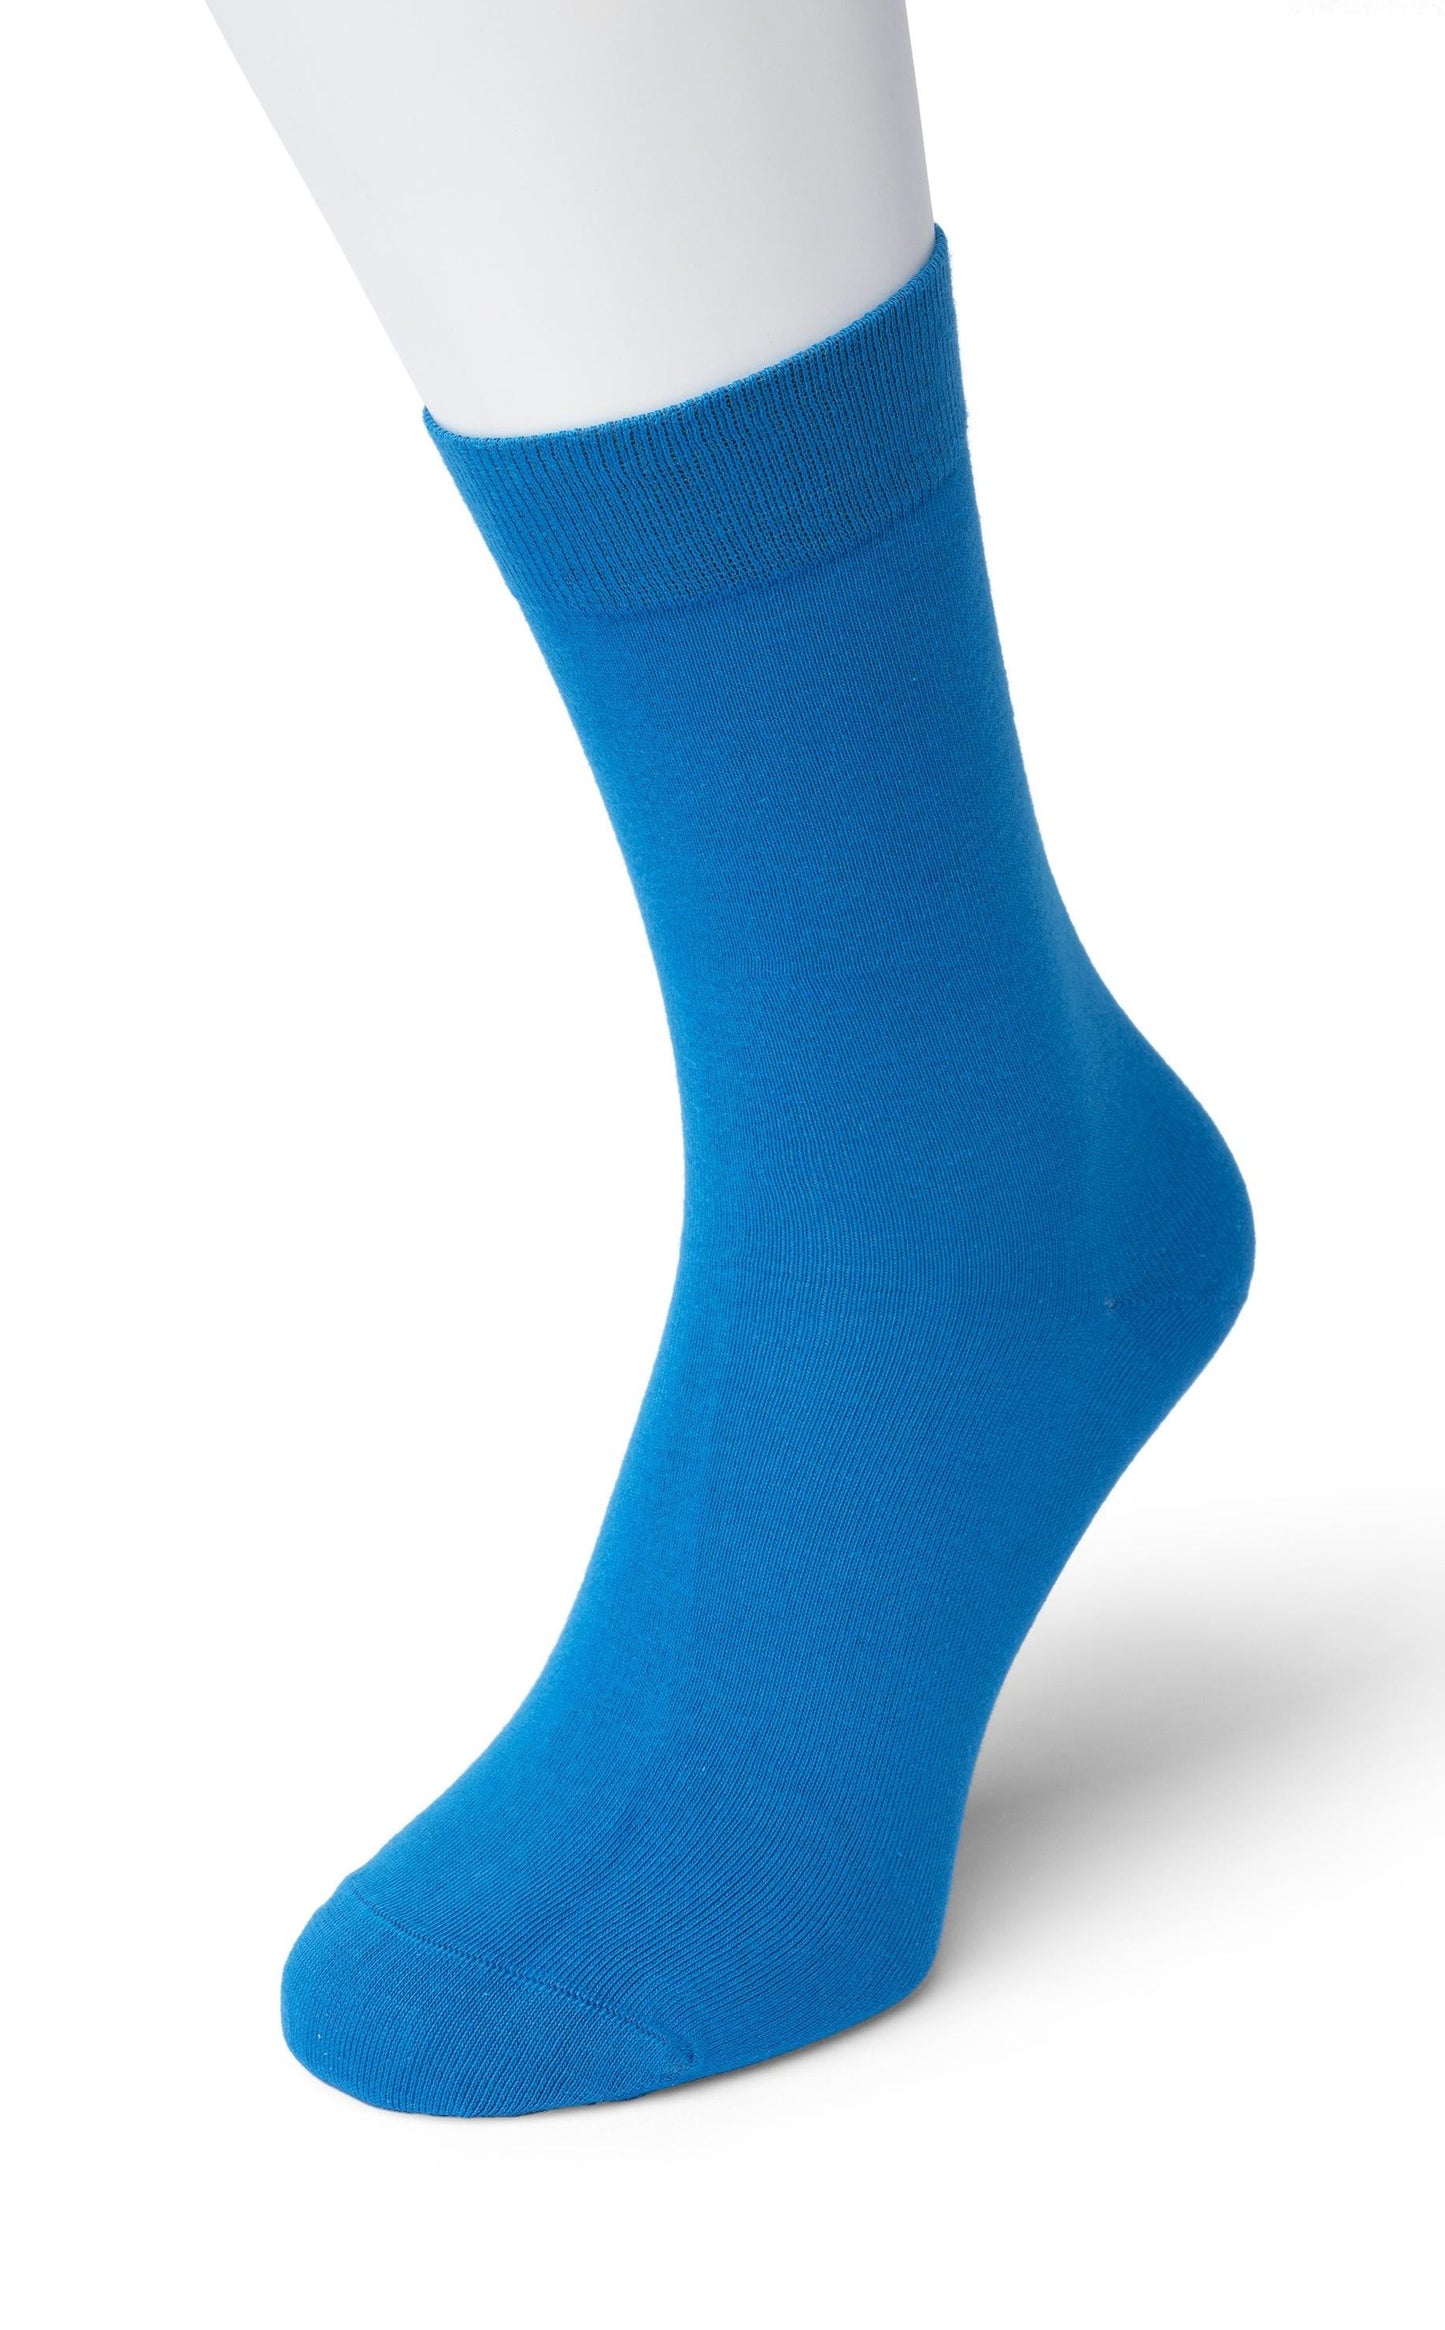 Bonnie Doon 83422 / BD632401 Cotton Sock -  Ocean blue ankle socks available in men and women sizes